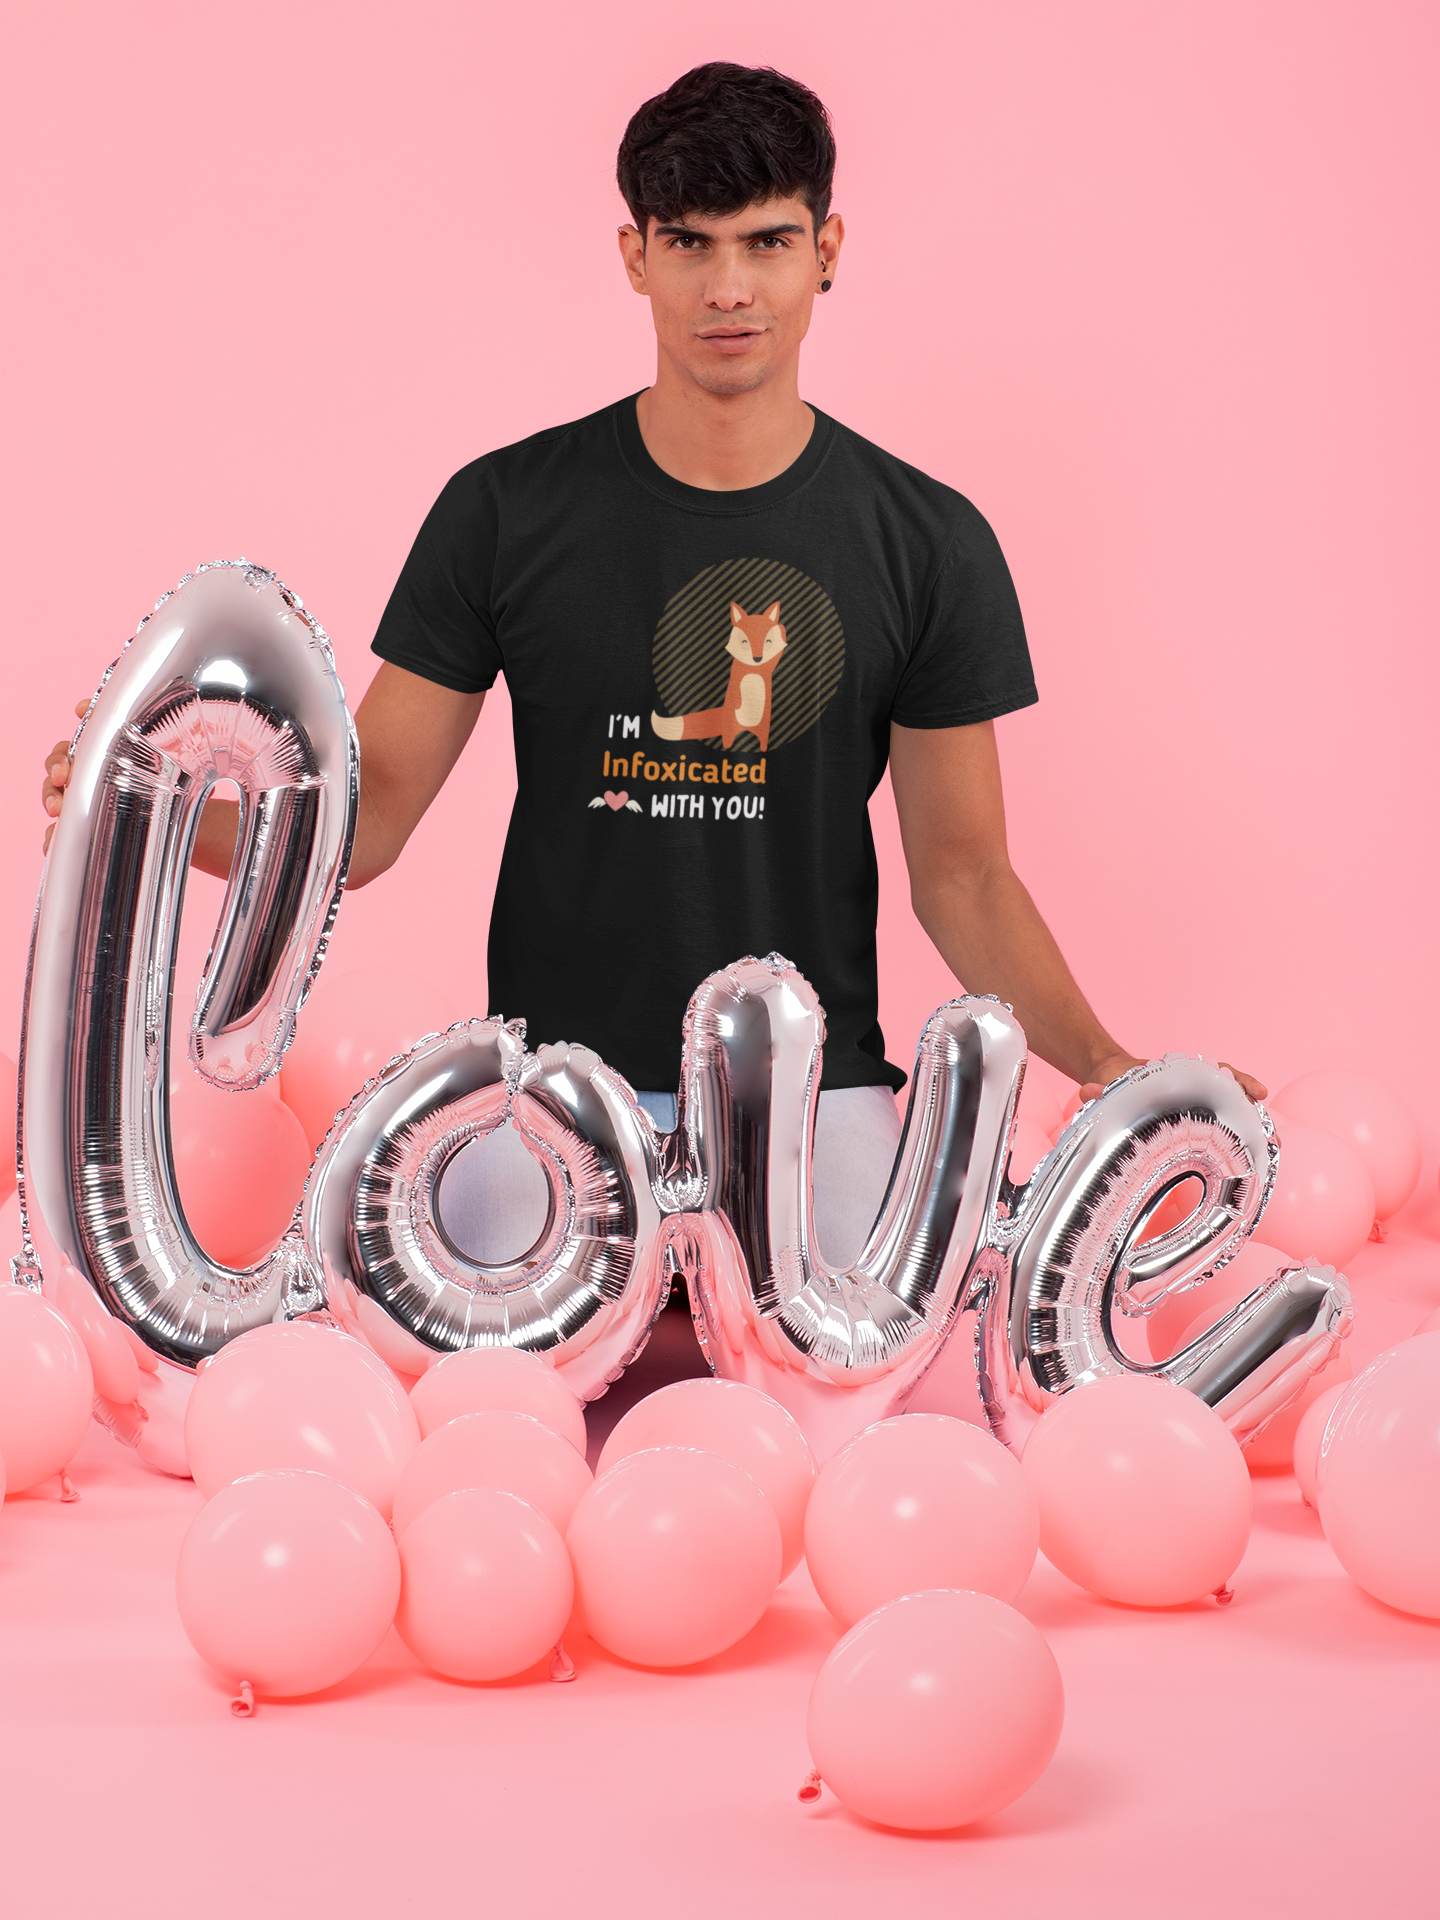 Infoxicated with you - Premium cotton tee celebrating love...